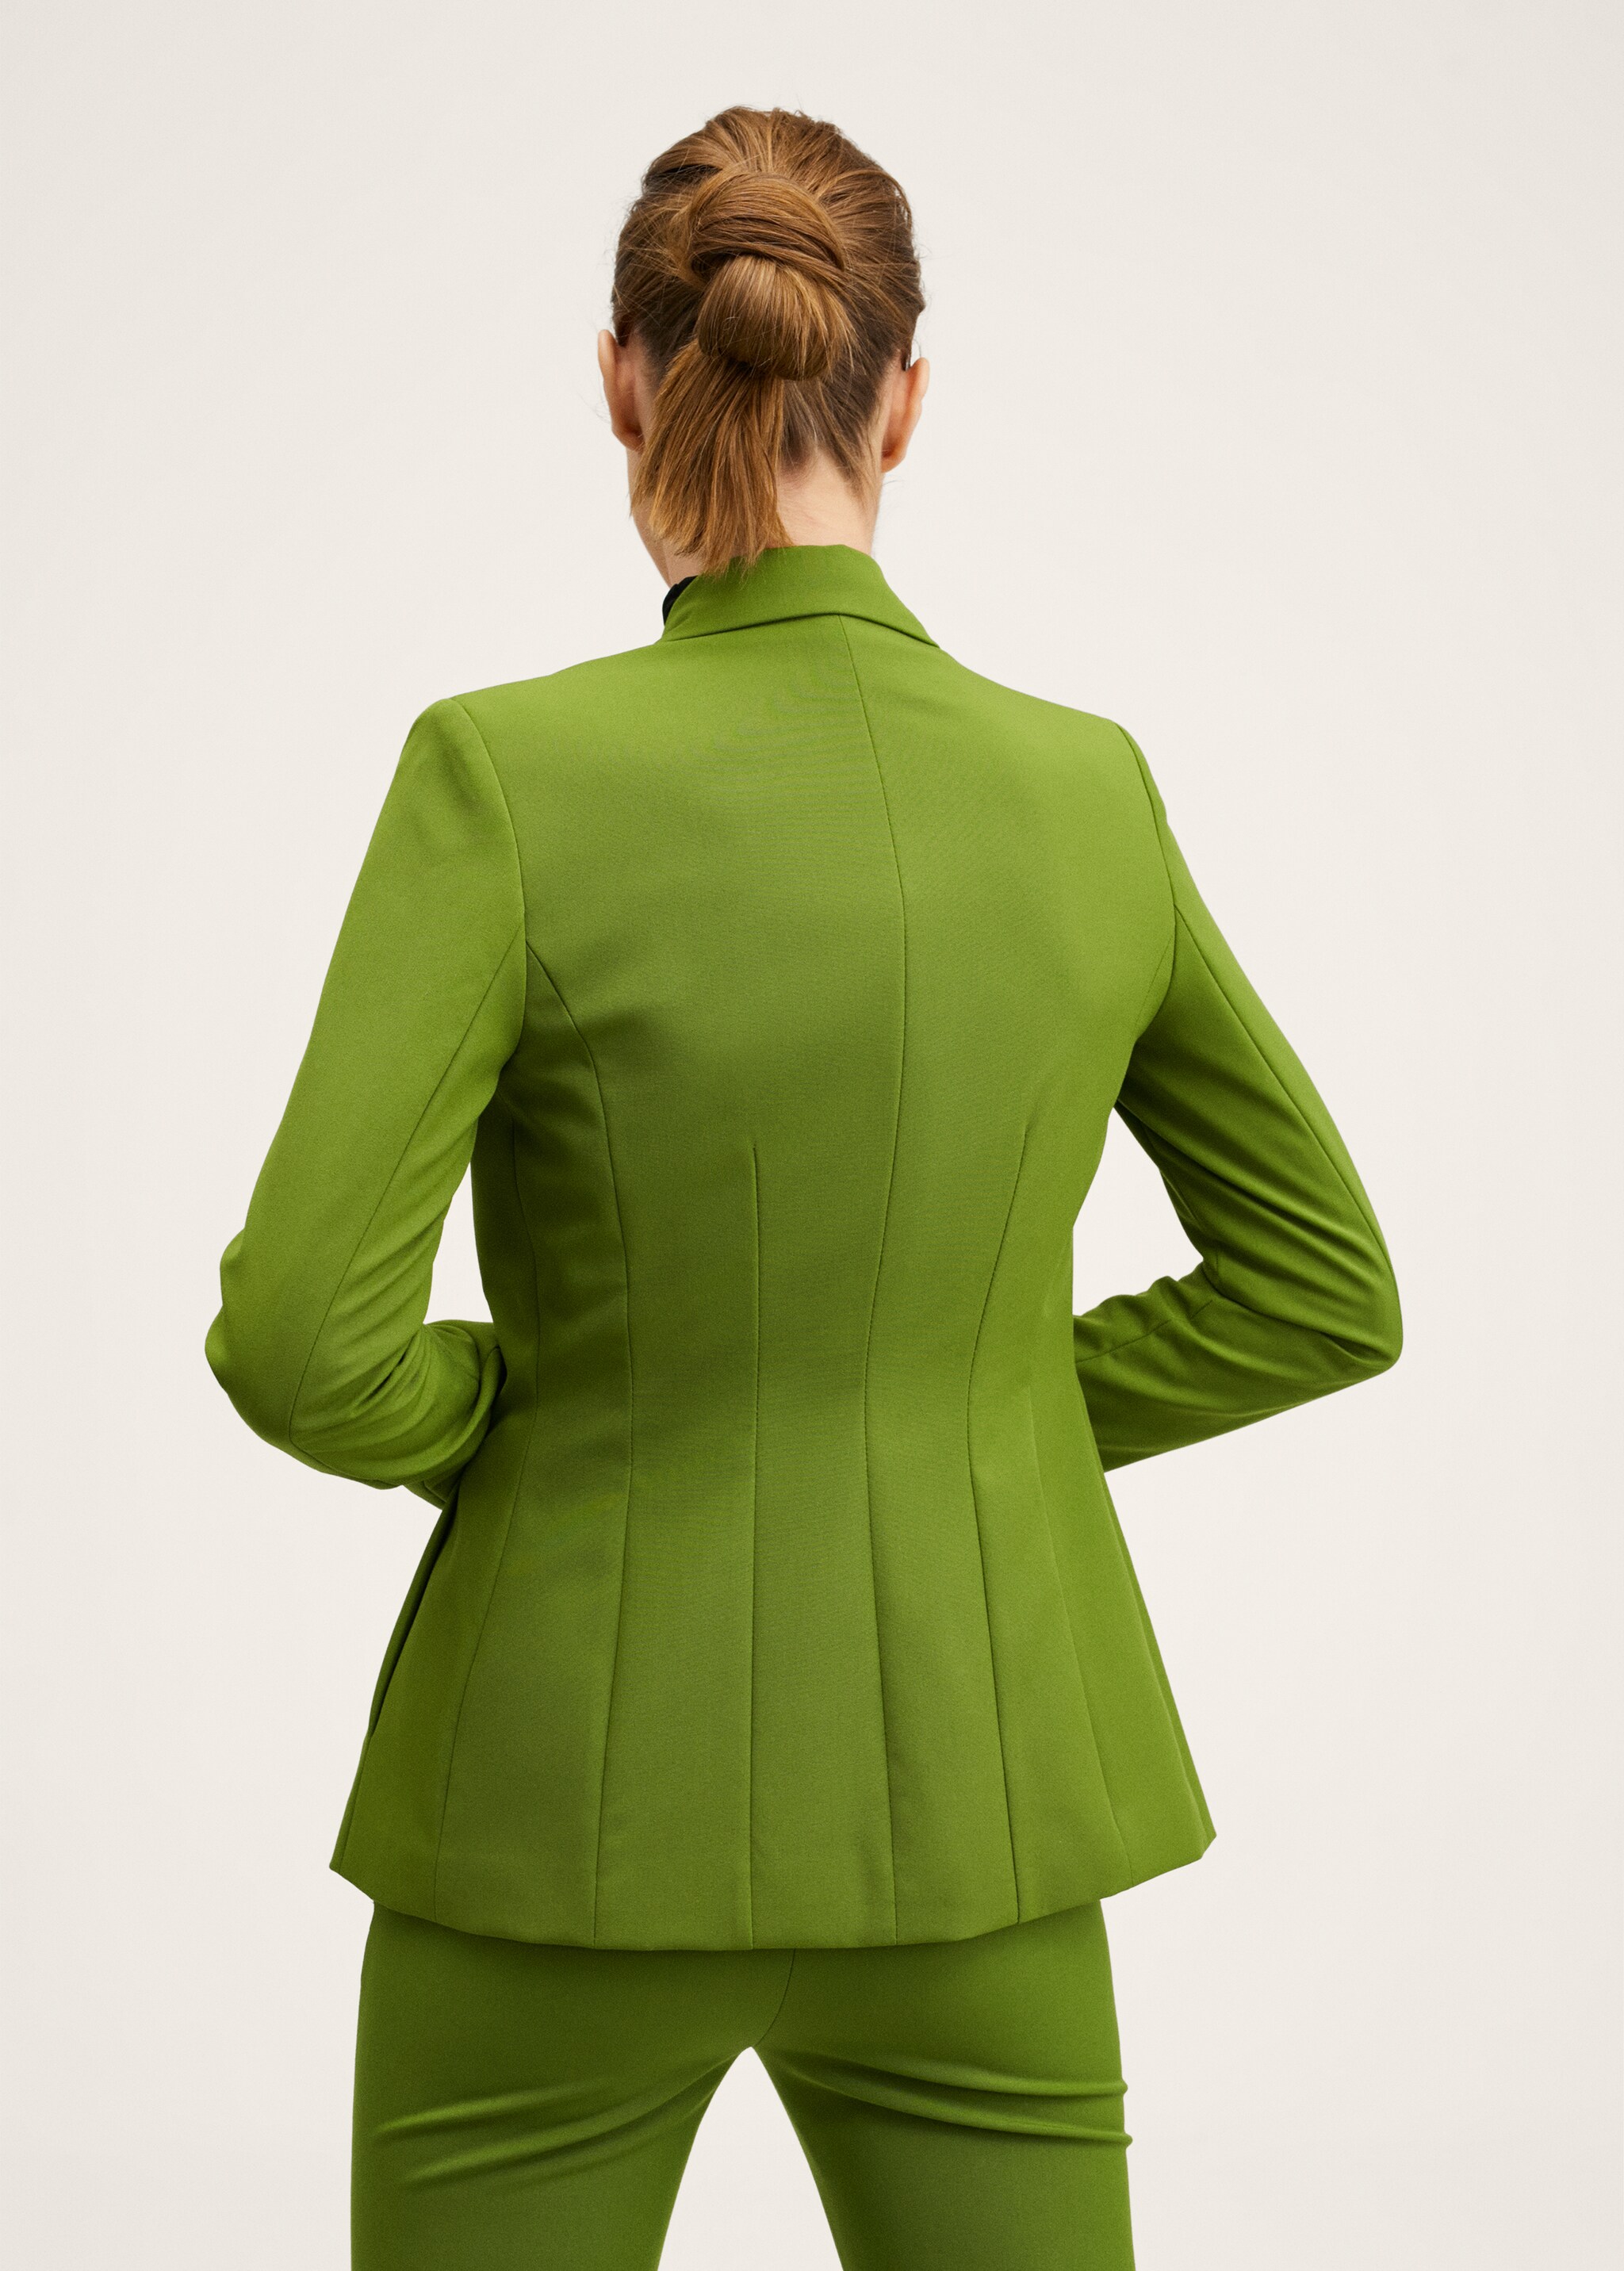 Fitted suit jacket - Reverse of the article